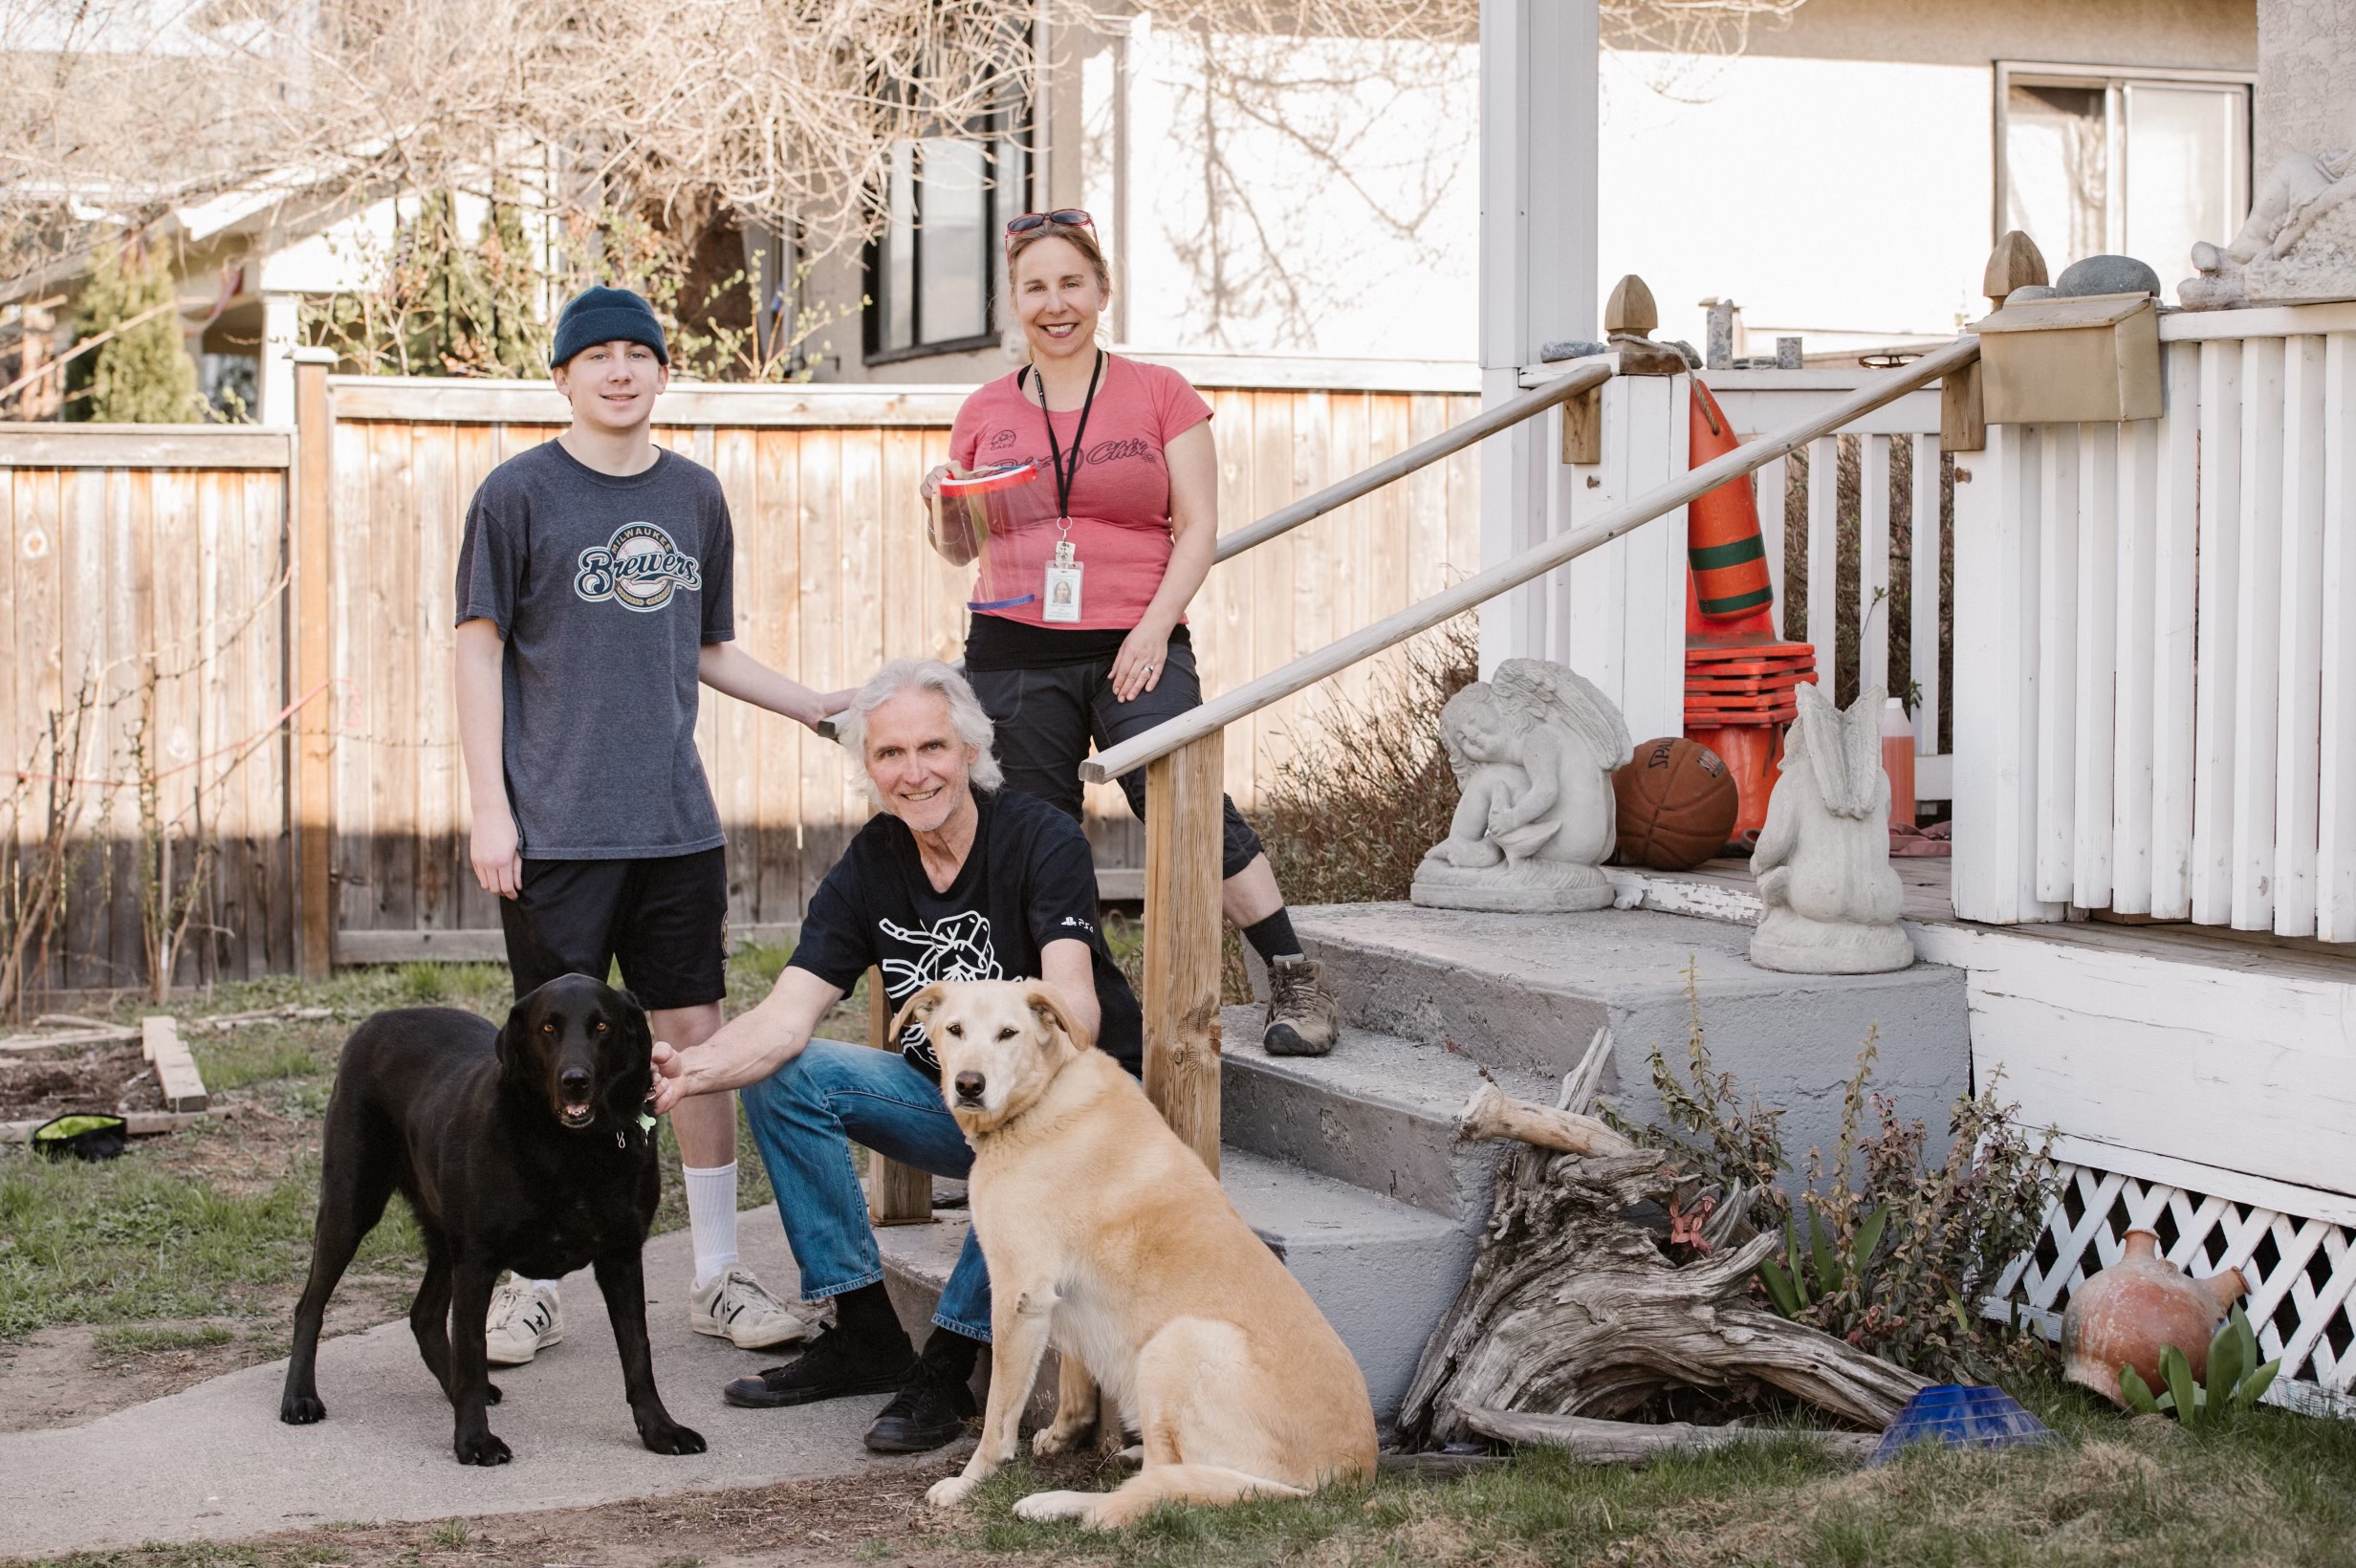 A man with longish white hair wearing a black tshirt, a youth wearing a grey toque and tshirt and a woman wearing a pink tshirt and holding a face shield stand on a porch with two dogs, one black and one tan